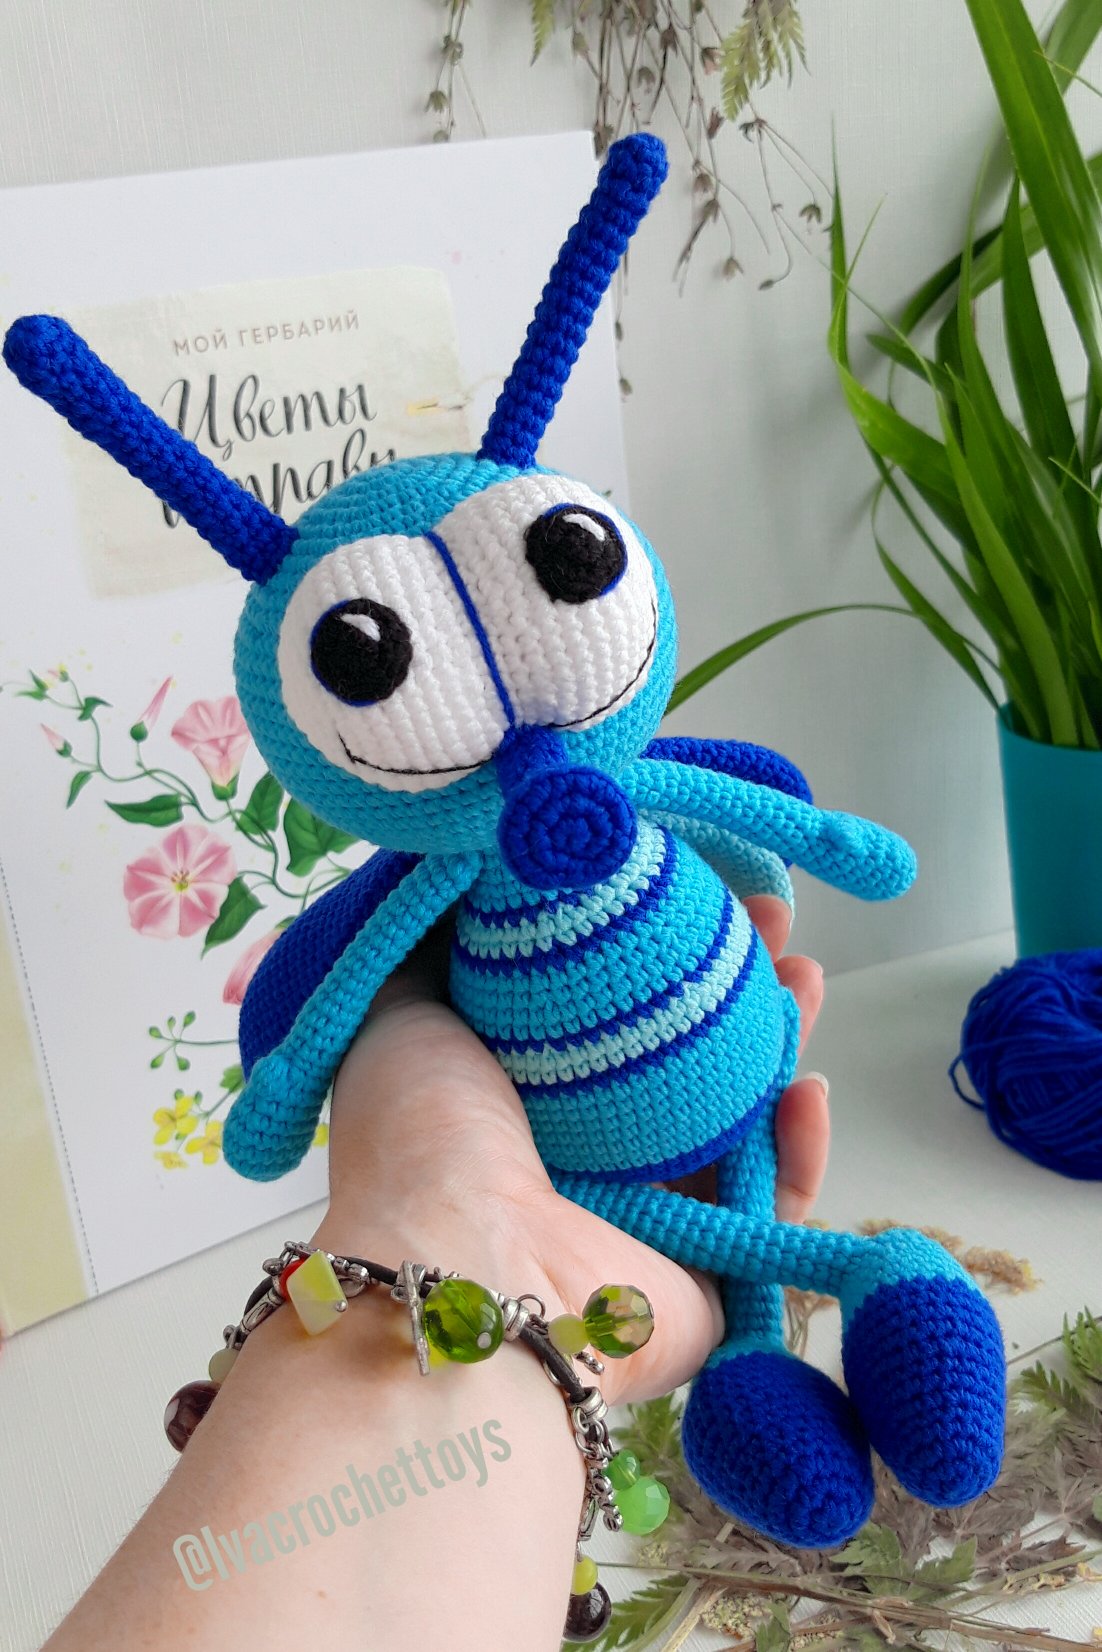 Stuffed toy fly,crochet toy insect,Baby shower gift,gift idea for Christmas,nursery toys for babies and toddlers,Baby photo prop,bugs toys